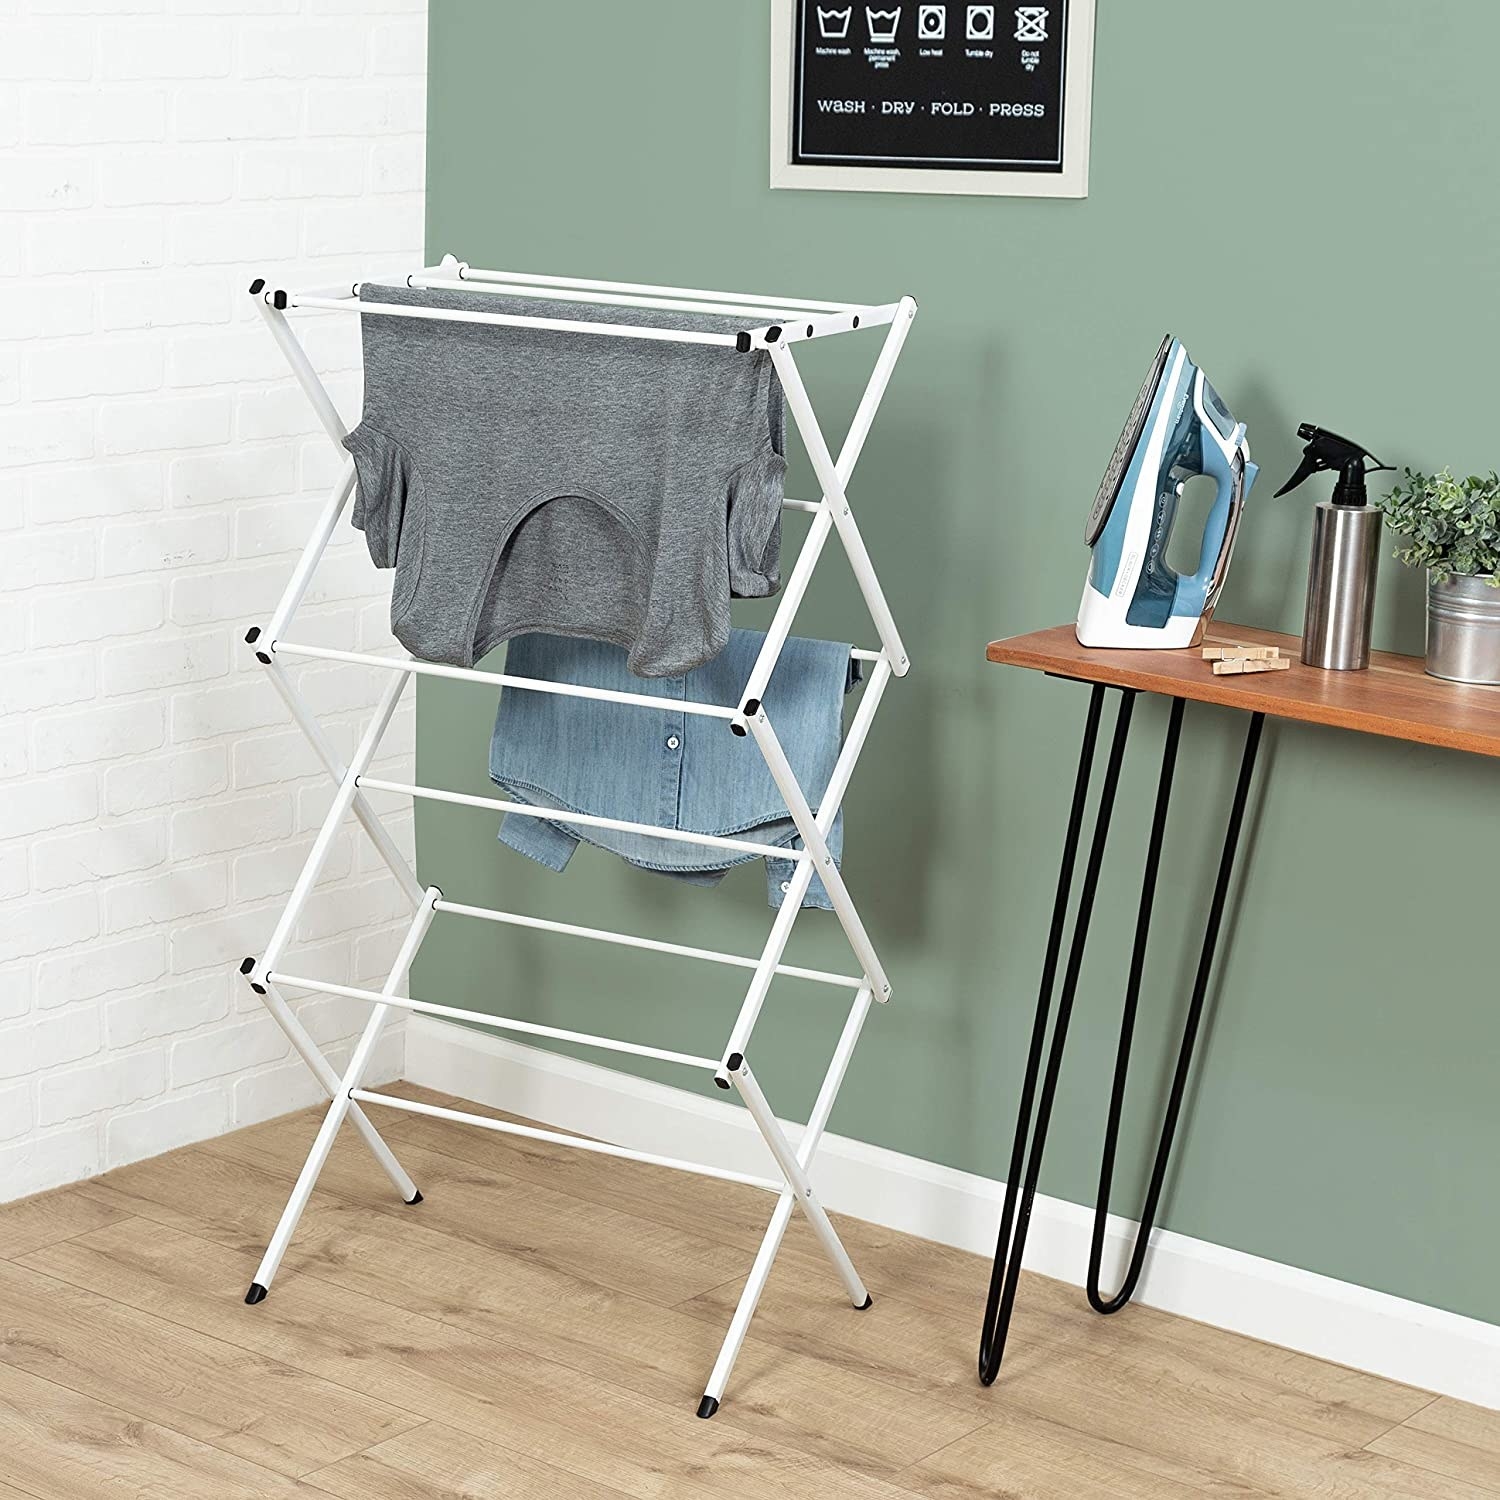 The foldable drying rack in a neat living room